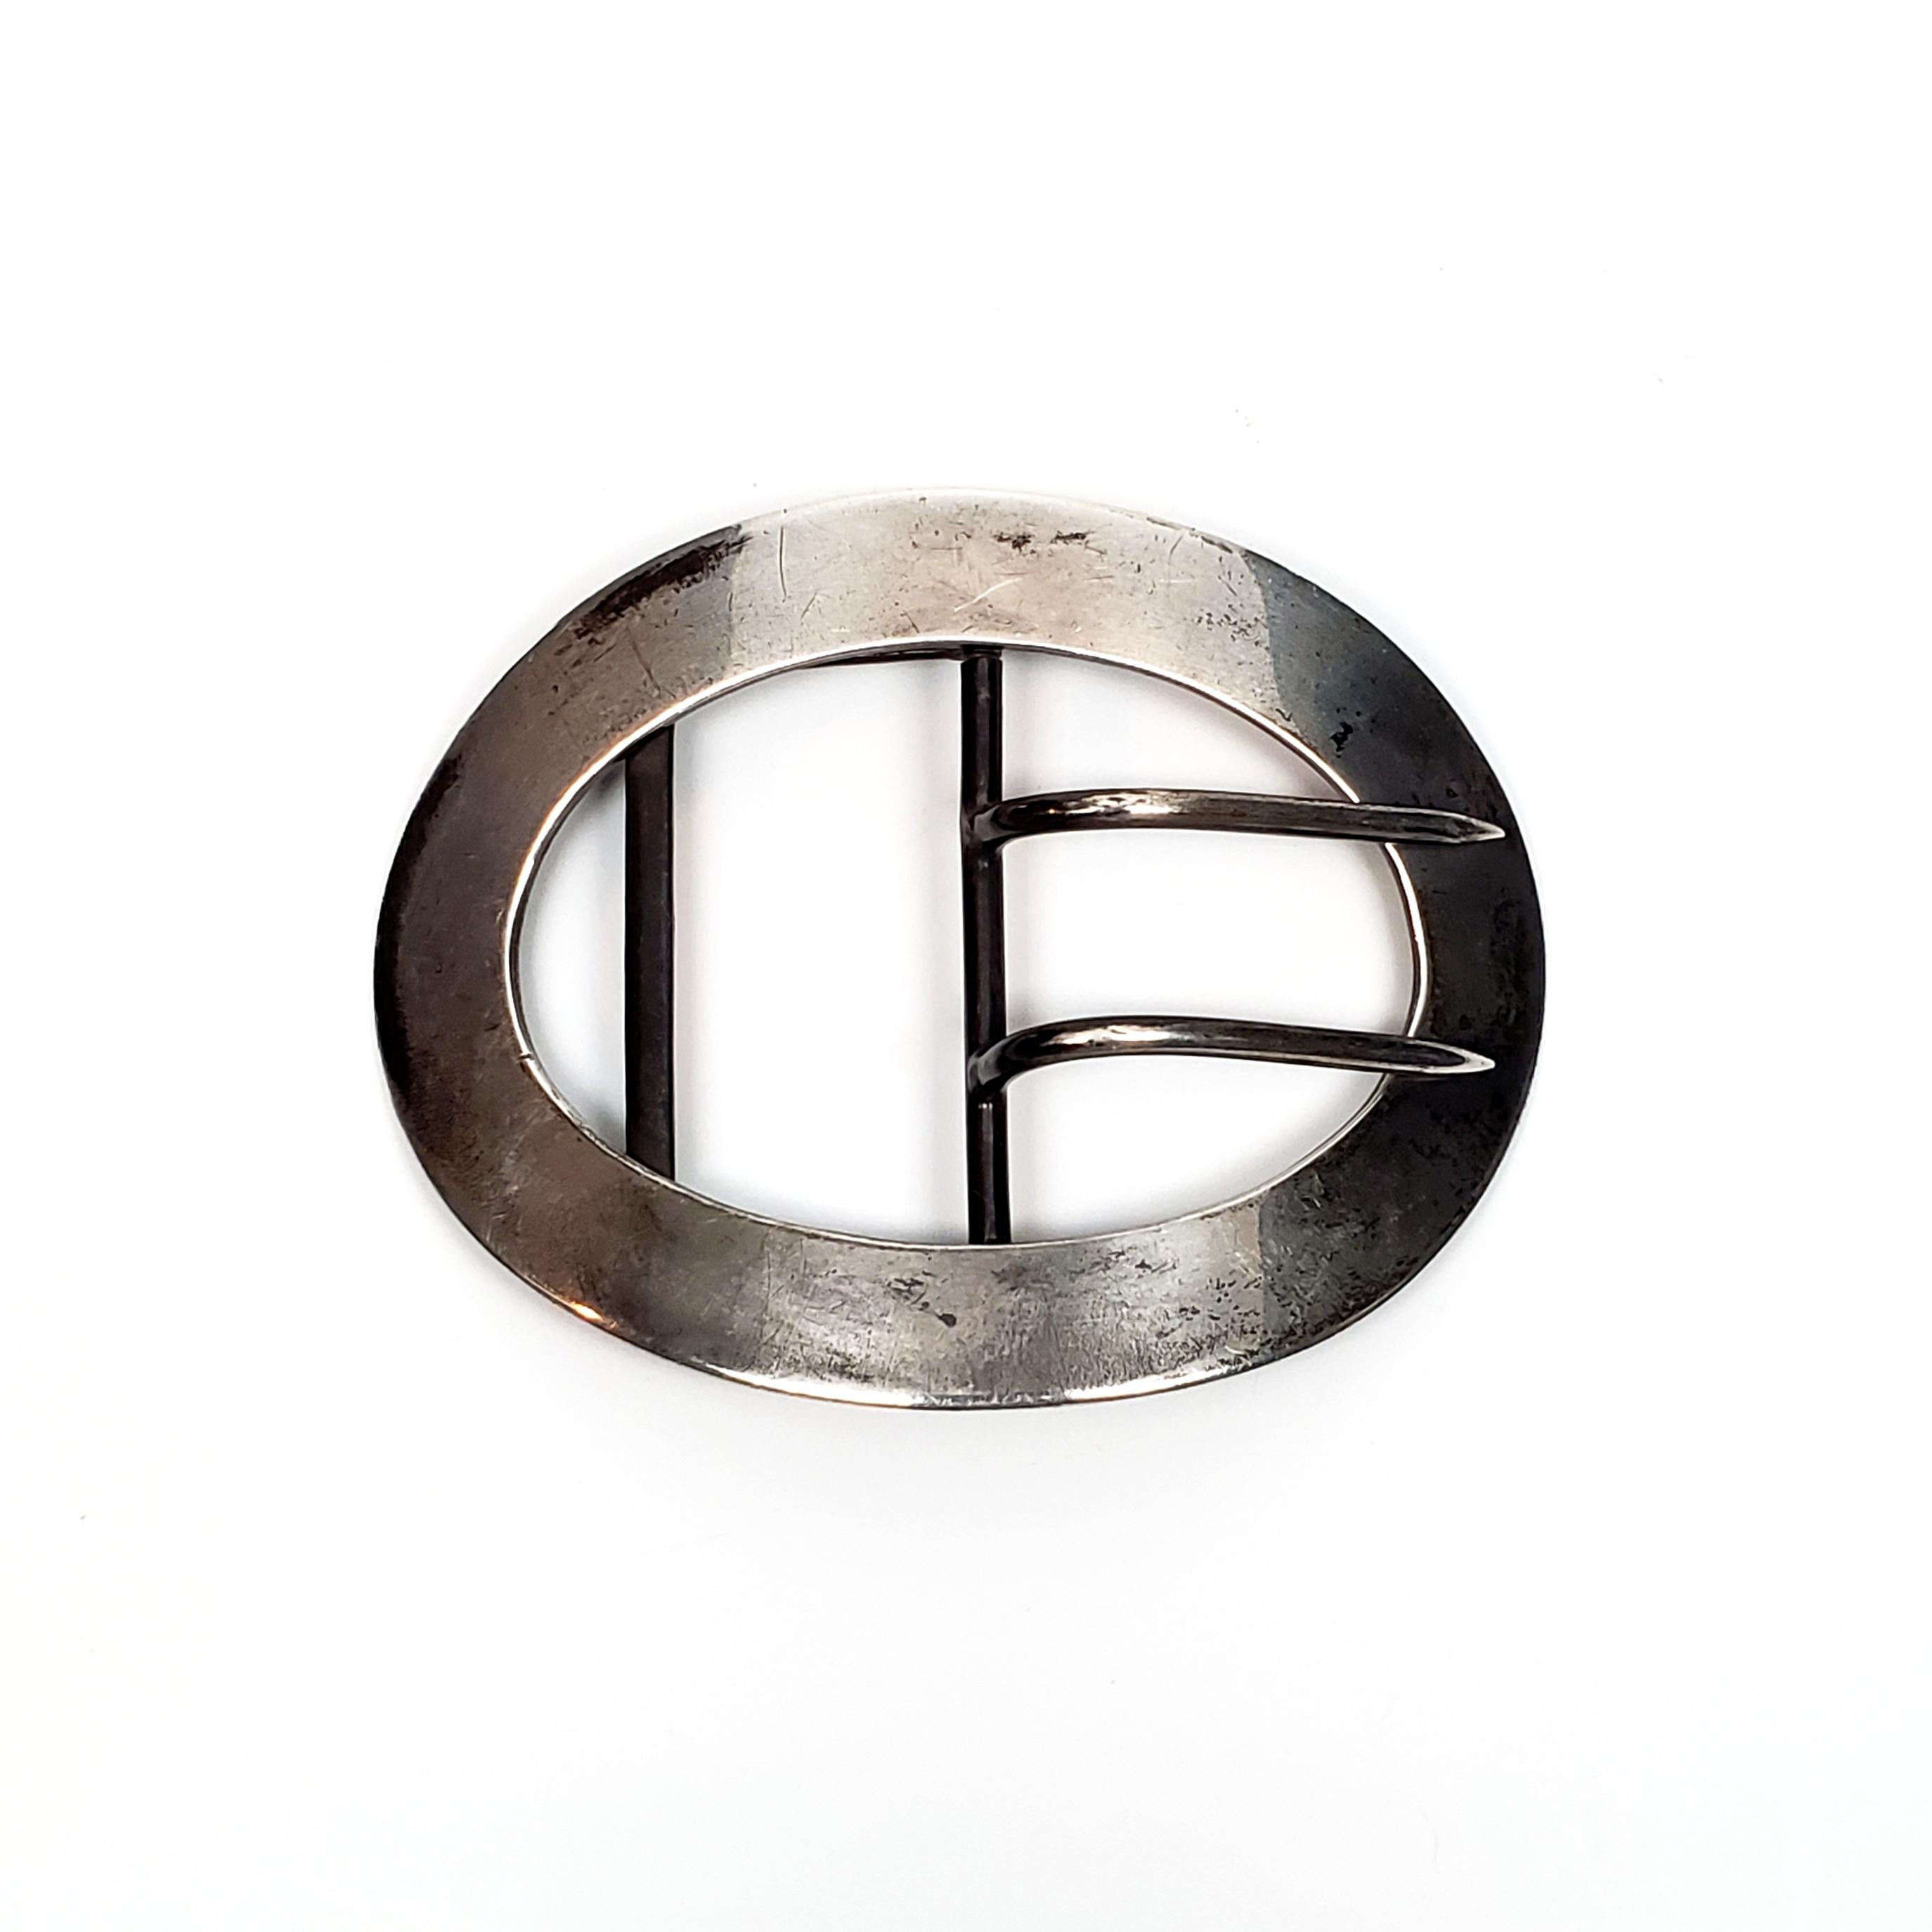 Antique sterling silver sash/belt buckle by I.N. Deitsch, circa 1904-1915.

A NYC manufacturer of sterling silver silverware, jewelry and picture frames, IN Deitsch designed this simple oval belt/sash buckle.

Measures 3